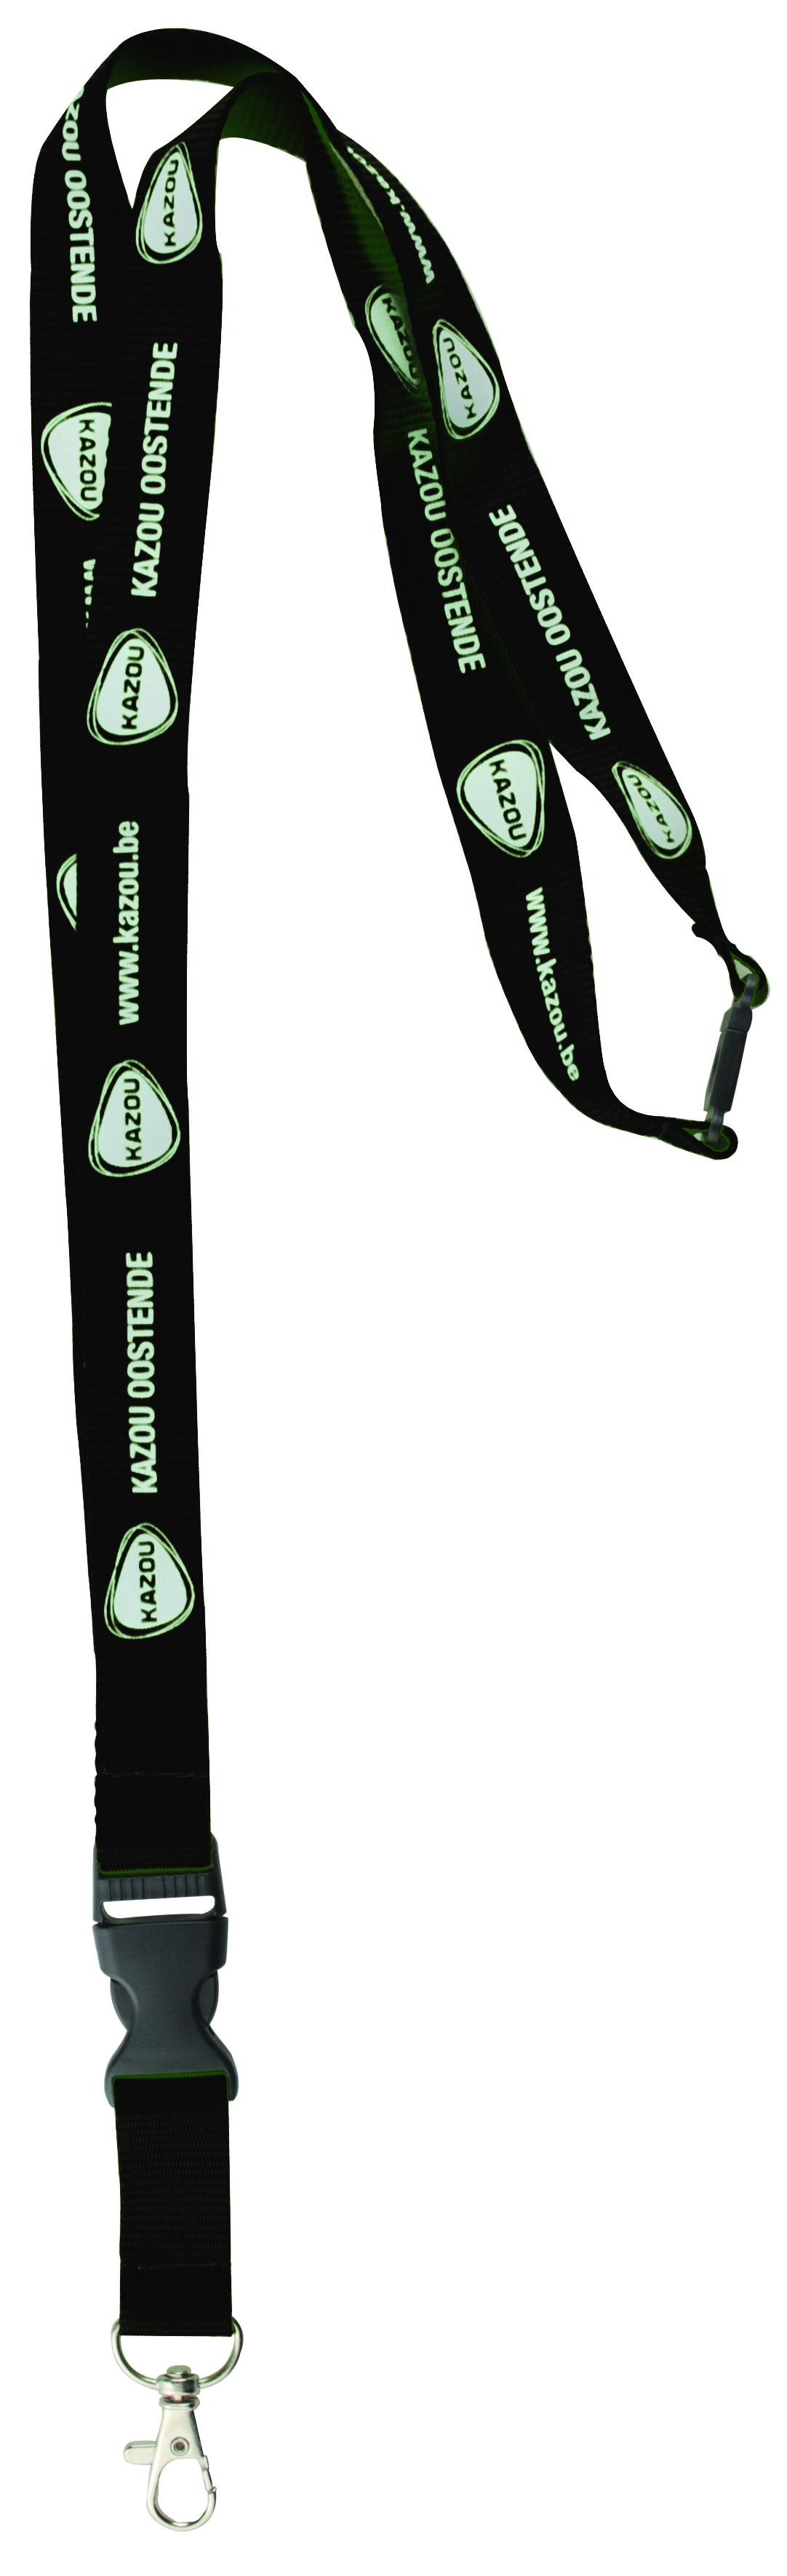 20mm Lanyard with Release Buckle and Safety Breakaway